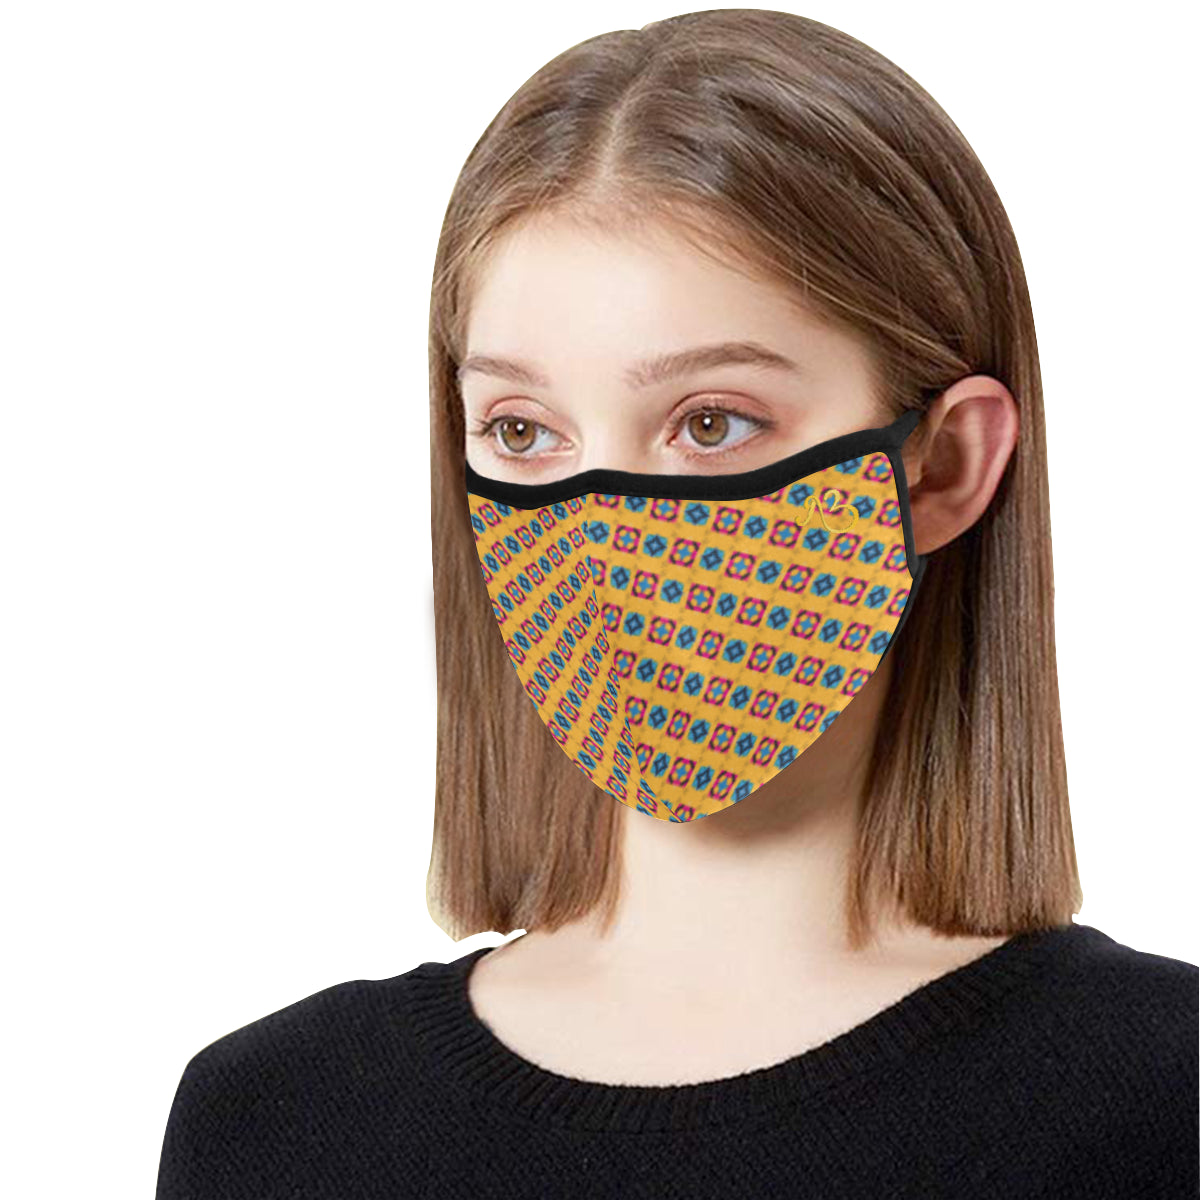 Alternate Print Cotton Fabric Face Mask with filter slot (30 Filters Included) - Non-medical use